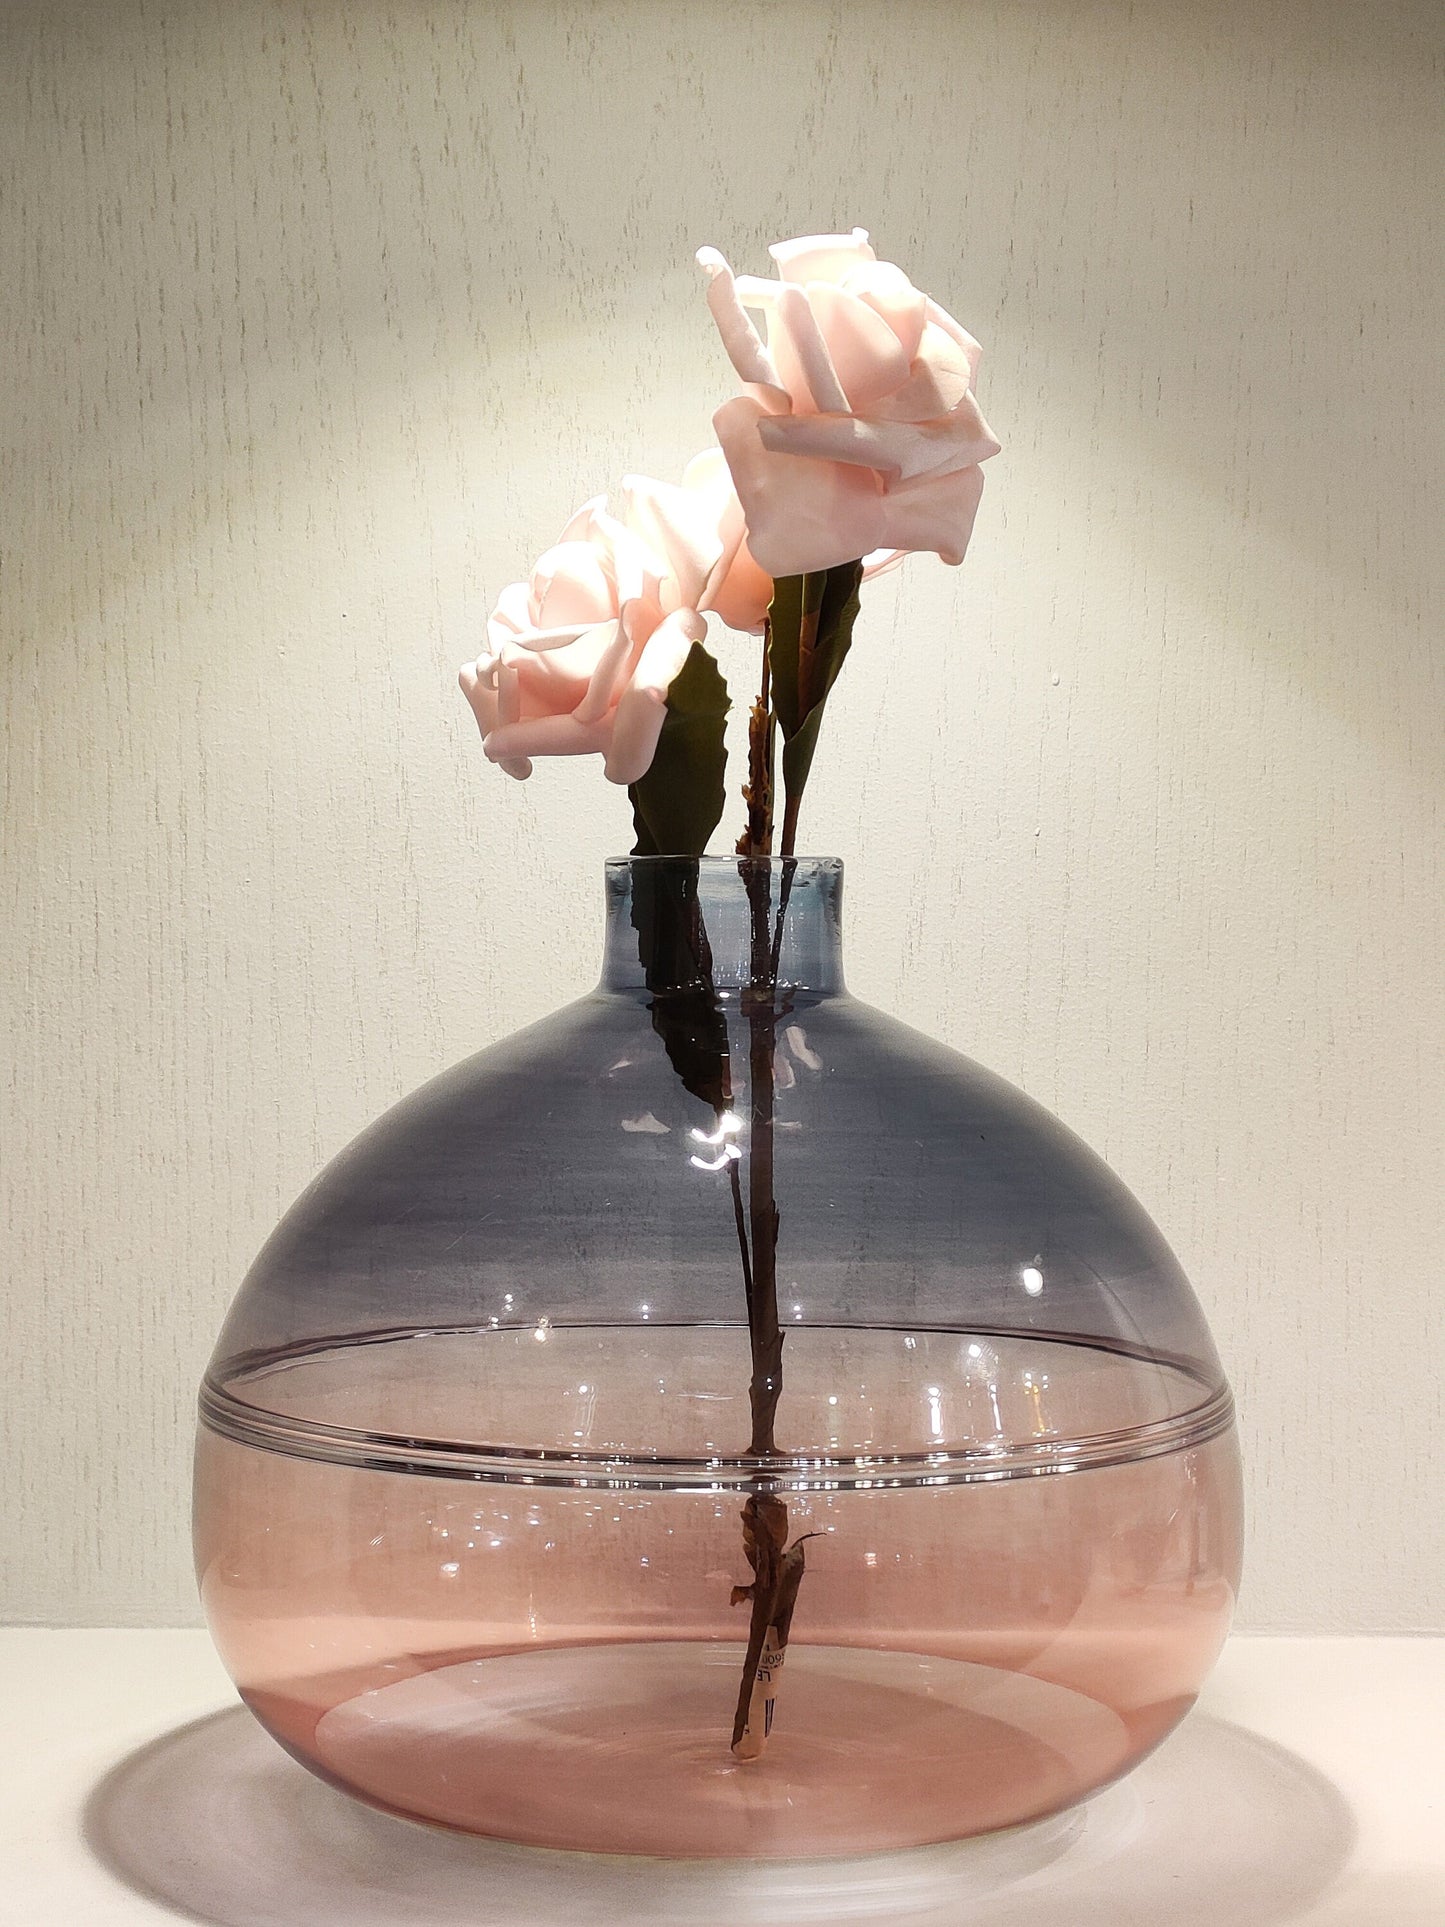 Shaded Grey and Pink Art Deco Vase , Hand blown Glassware , Blown glass vases , vintage glass vase , colored glass vases , vase for flowers